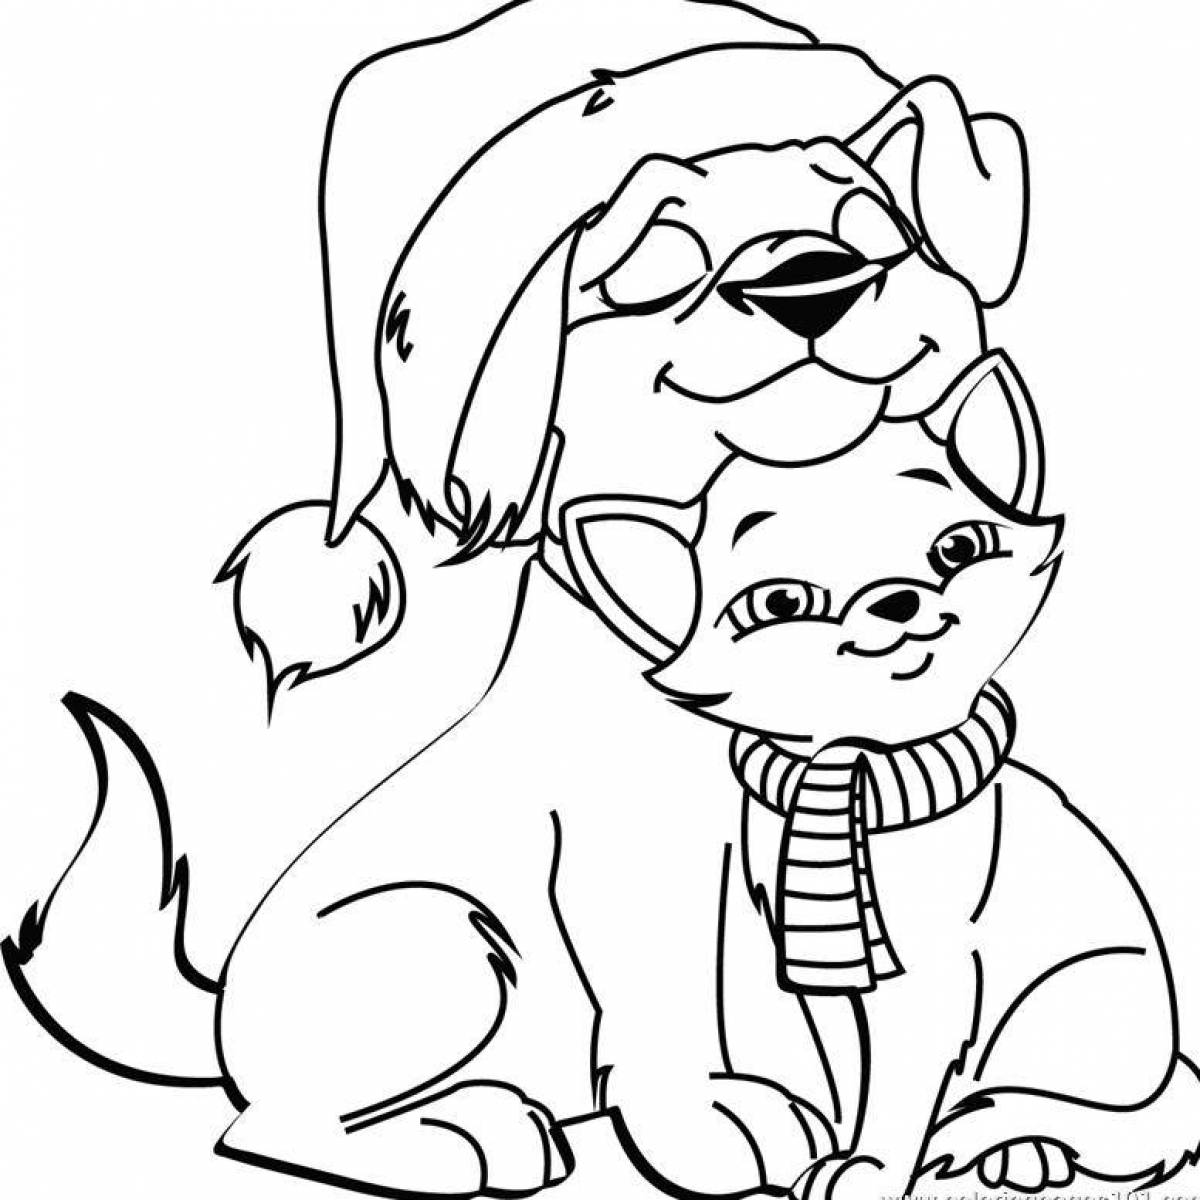 Adorable kitten and puppy coloring book